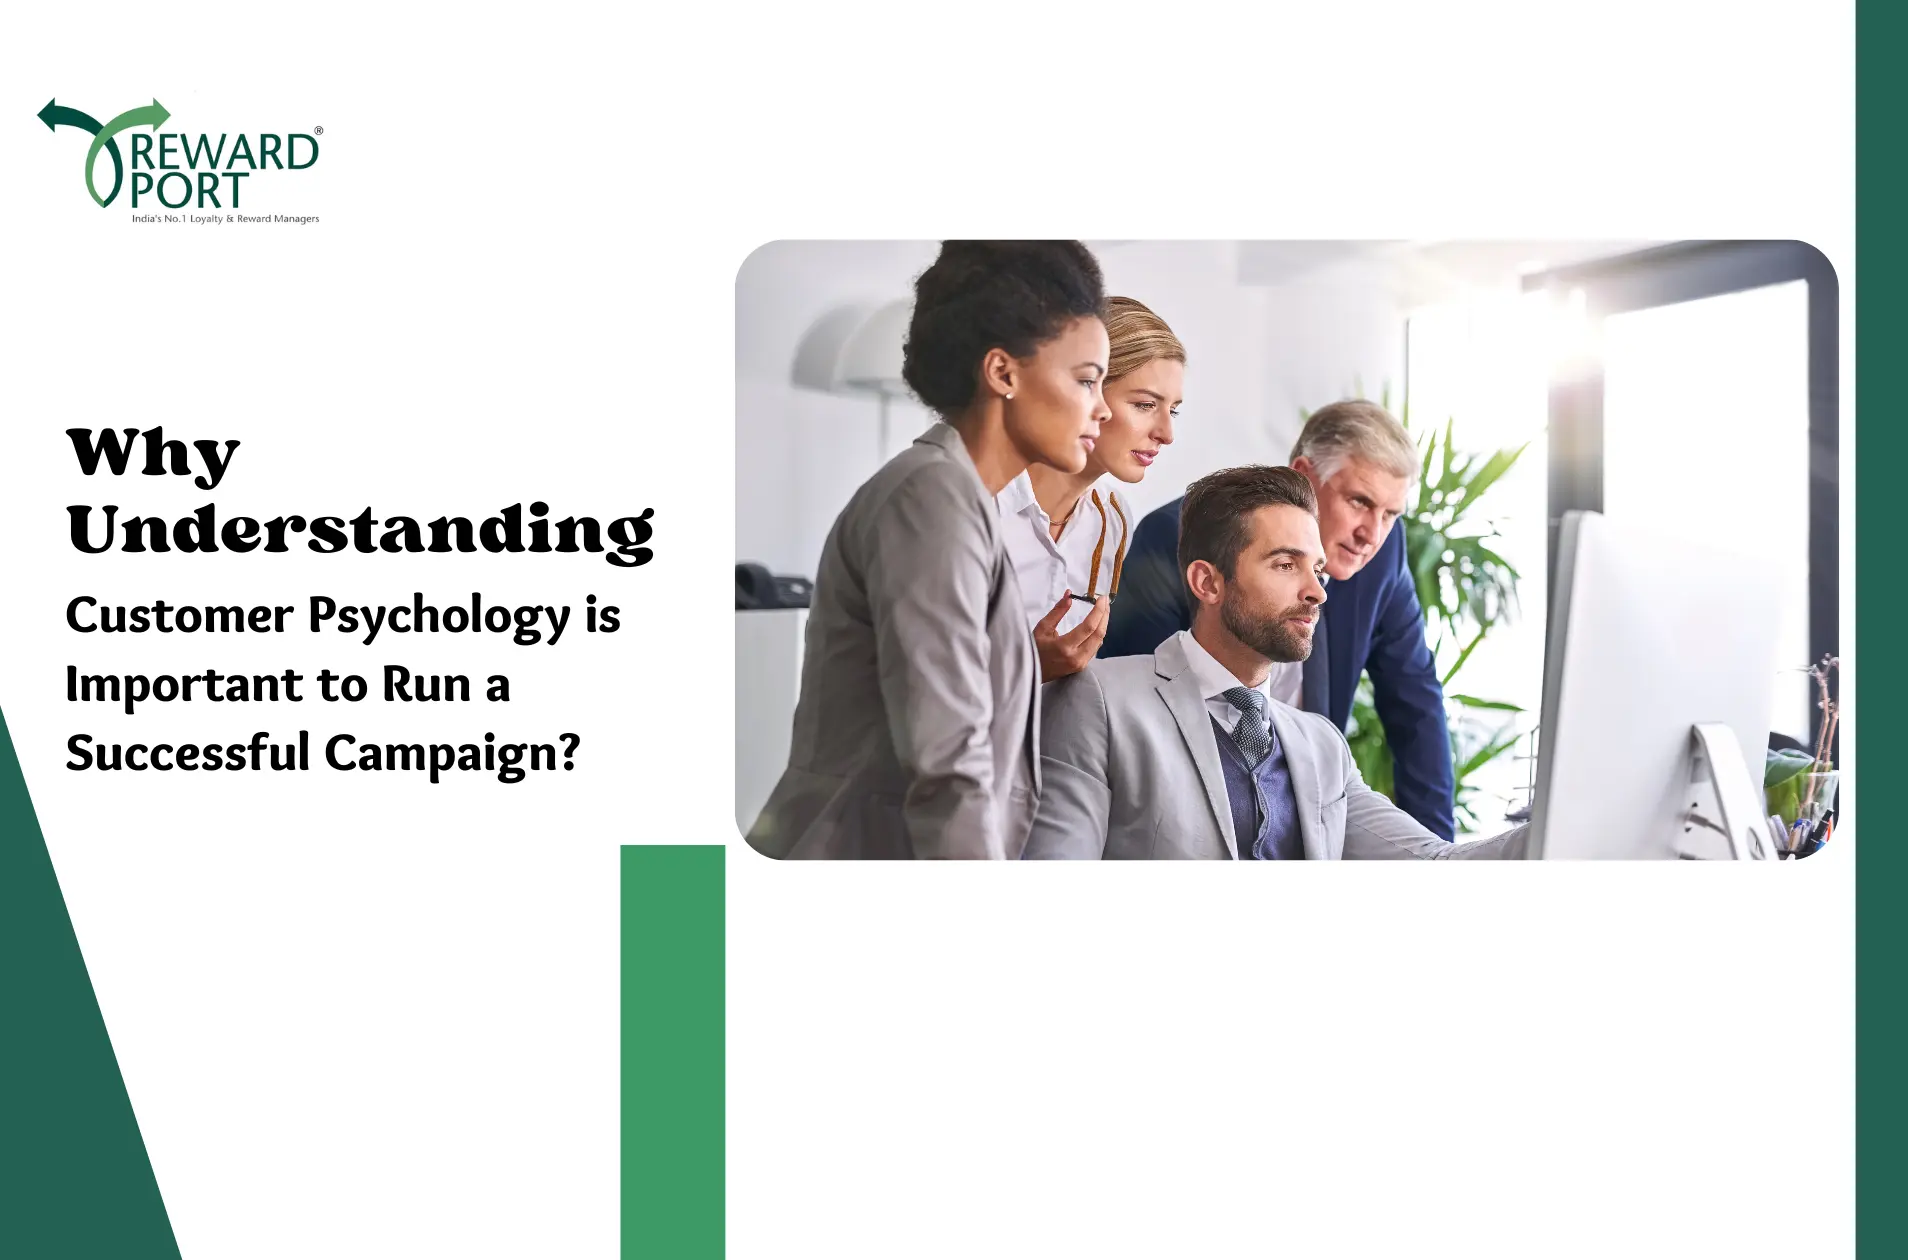 Why Understanding Customer Psychology is Important to Run a Successful Campaign